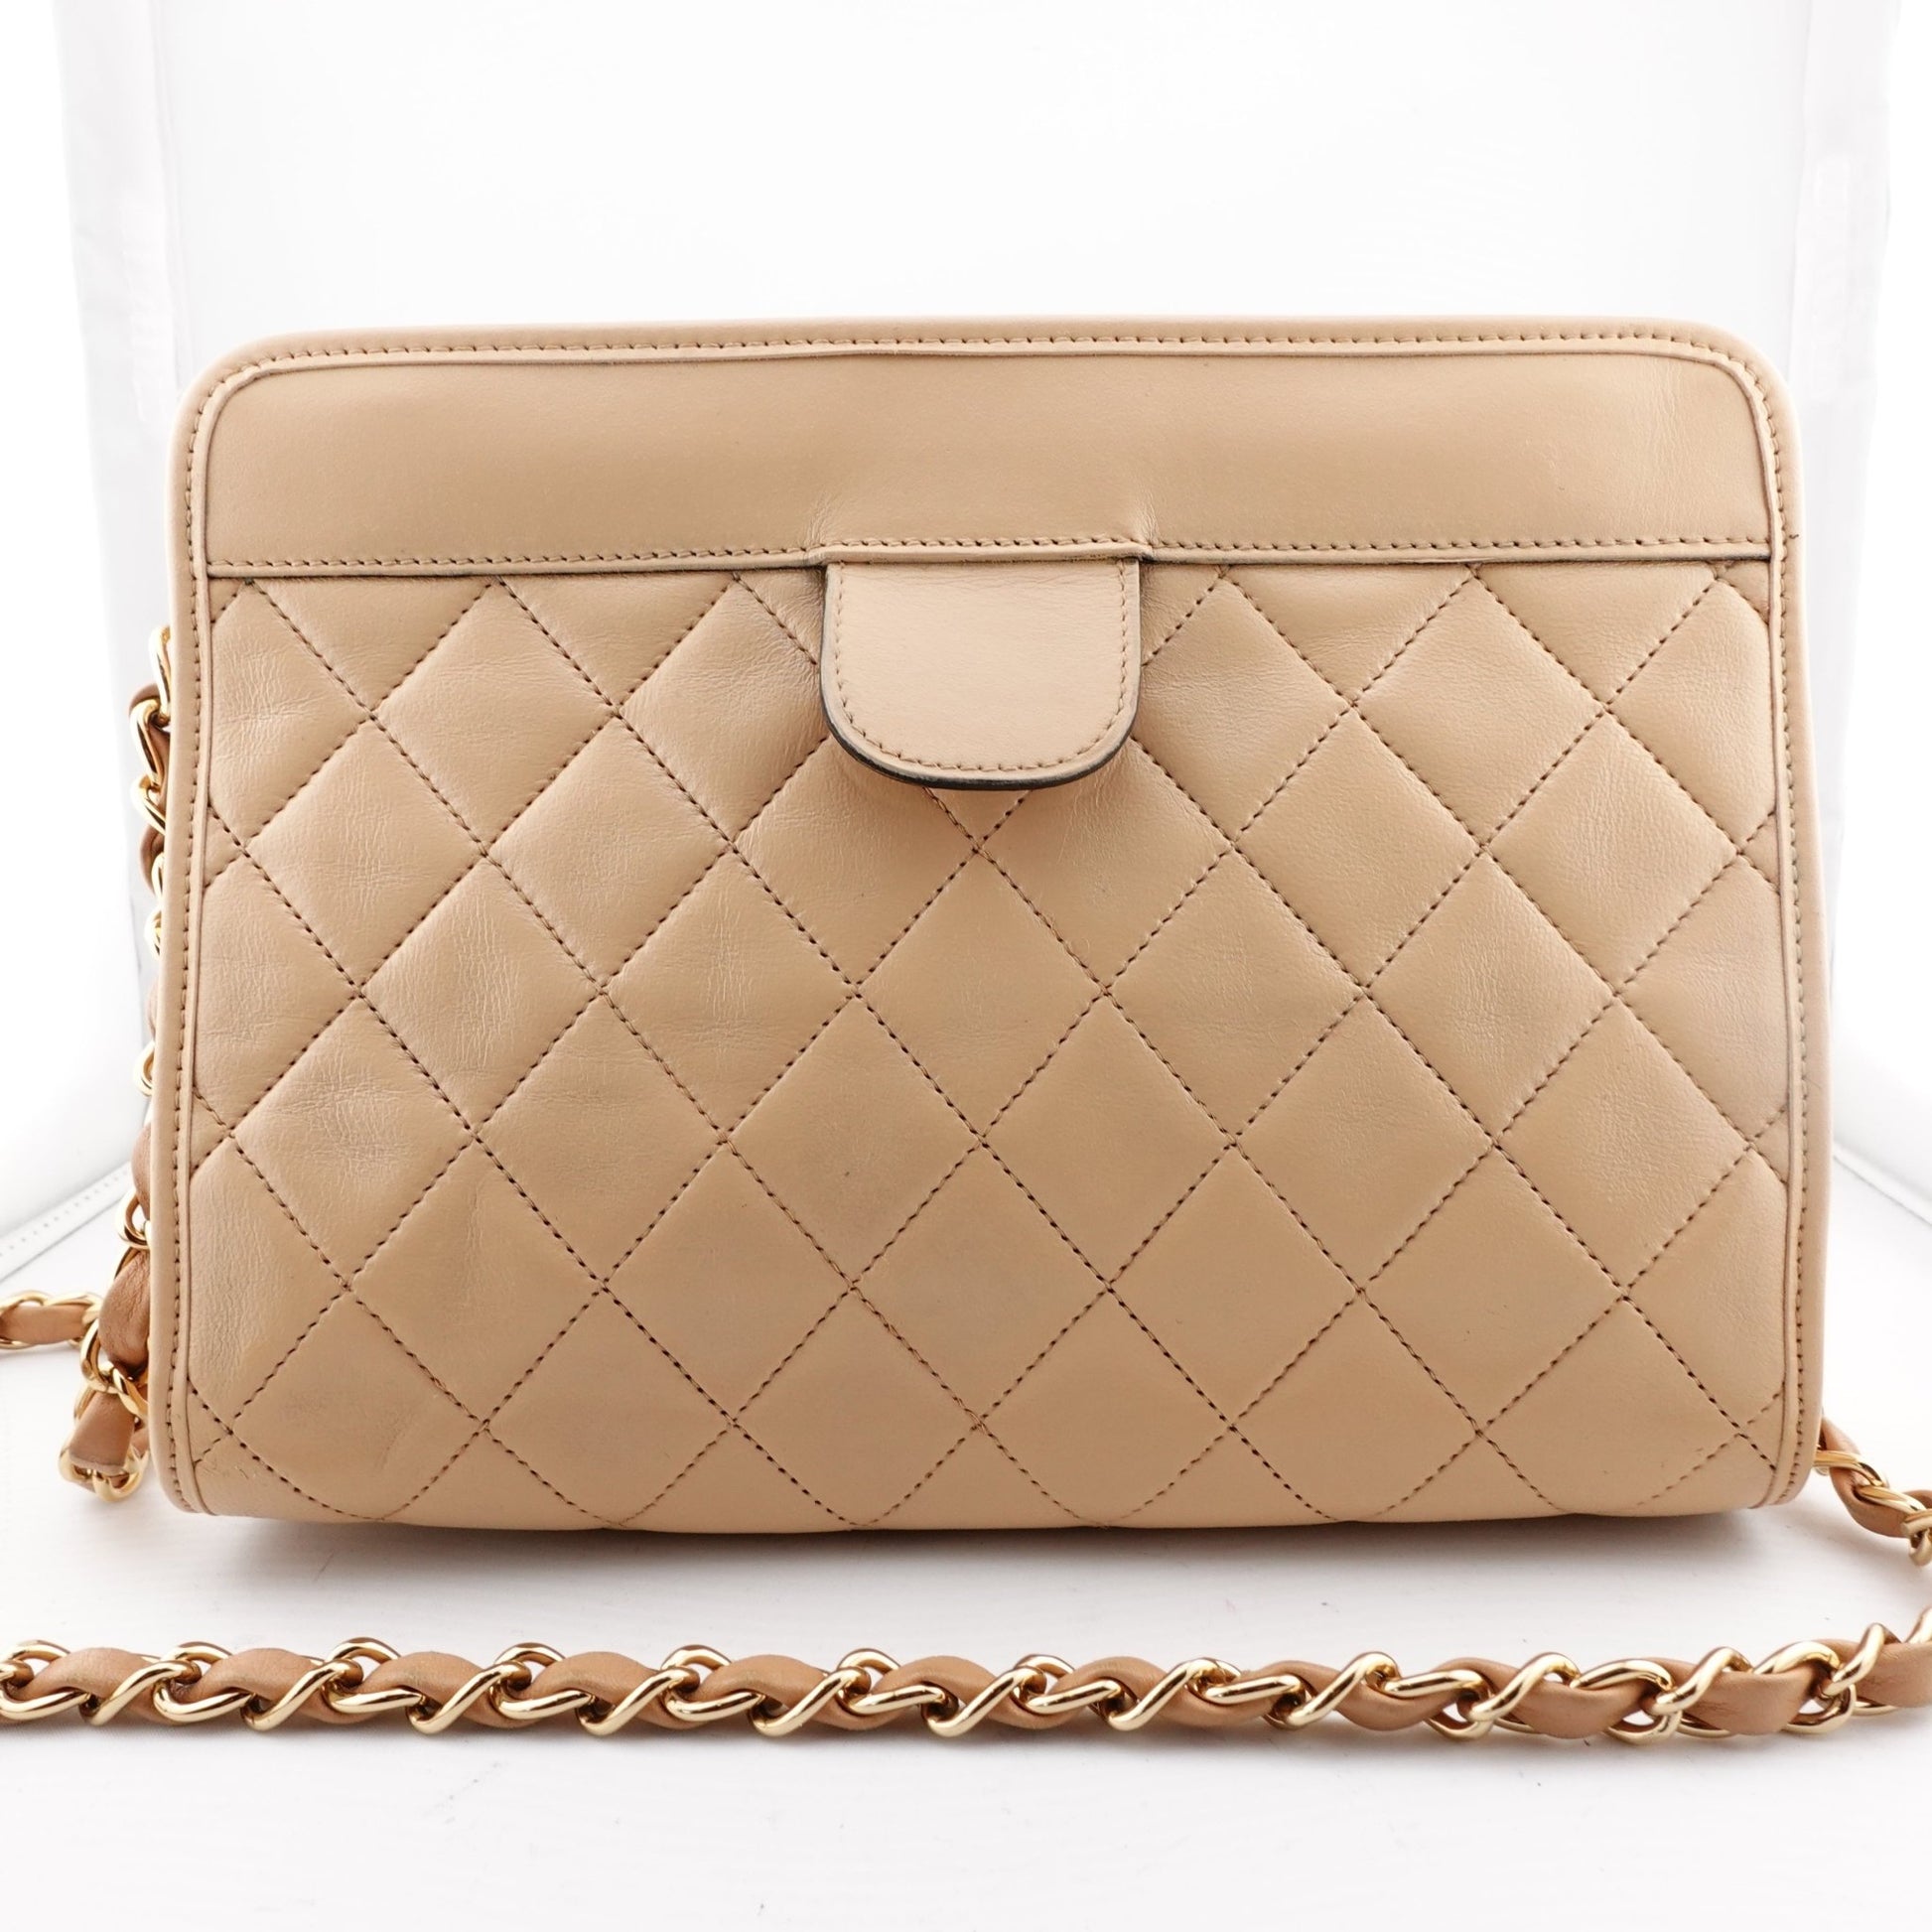 CHANEL Lambskin French Frame Clutch with Chain - Bag Envy